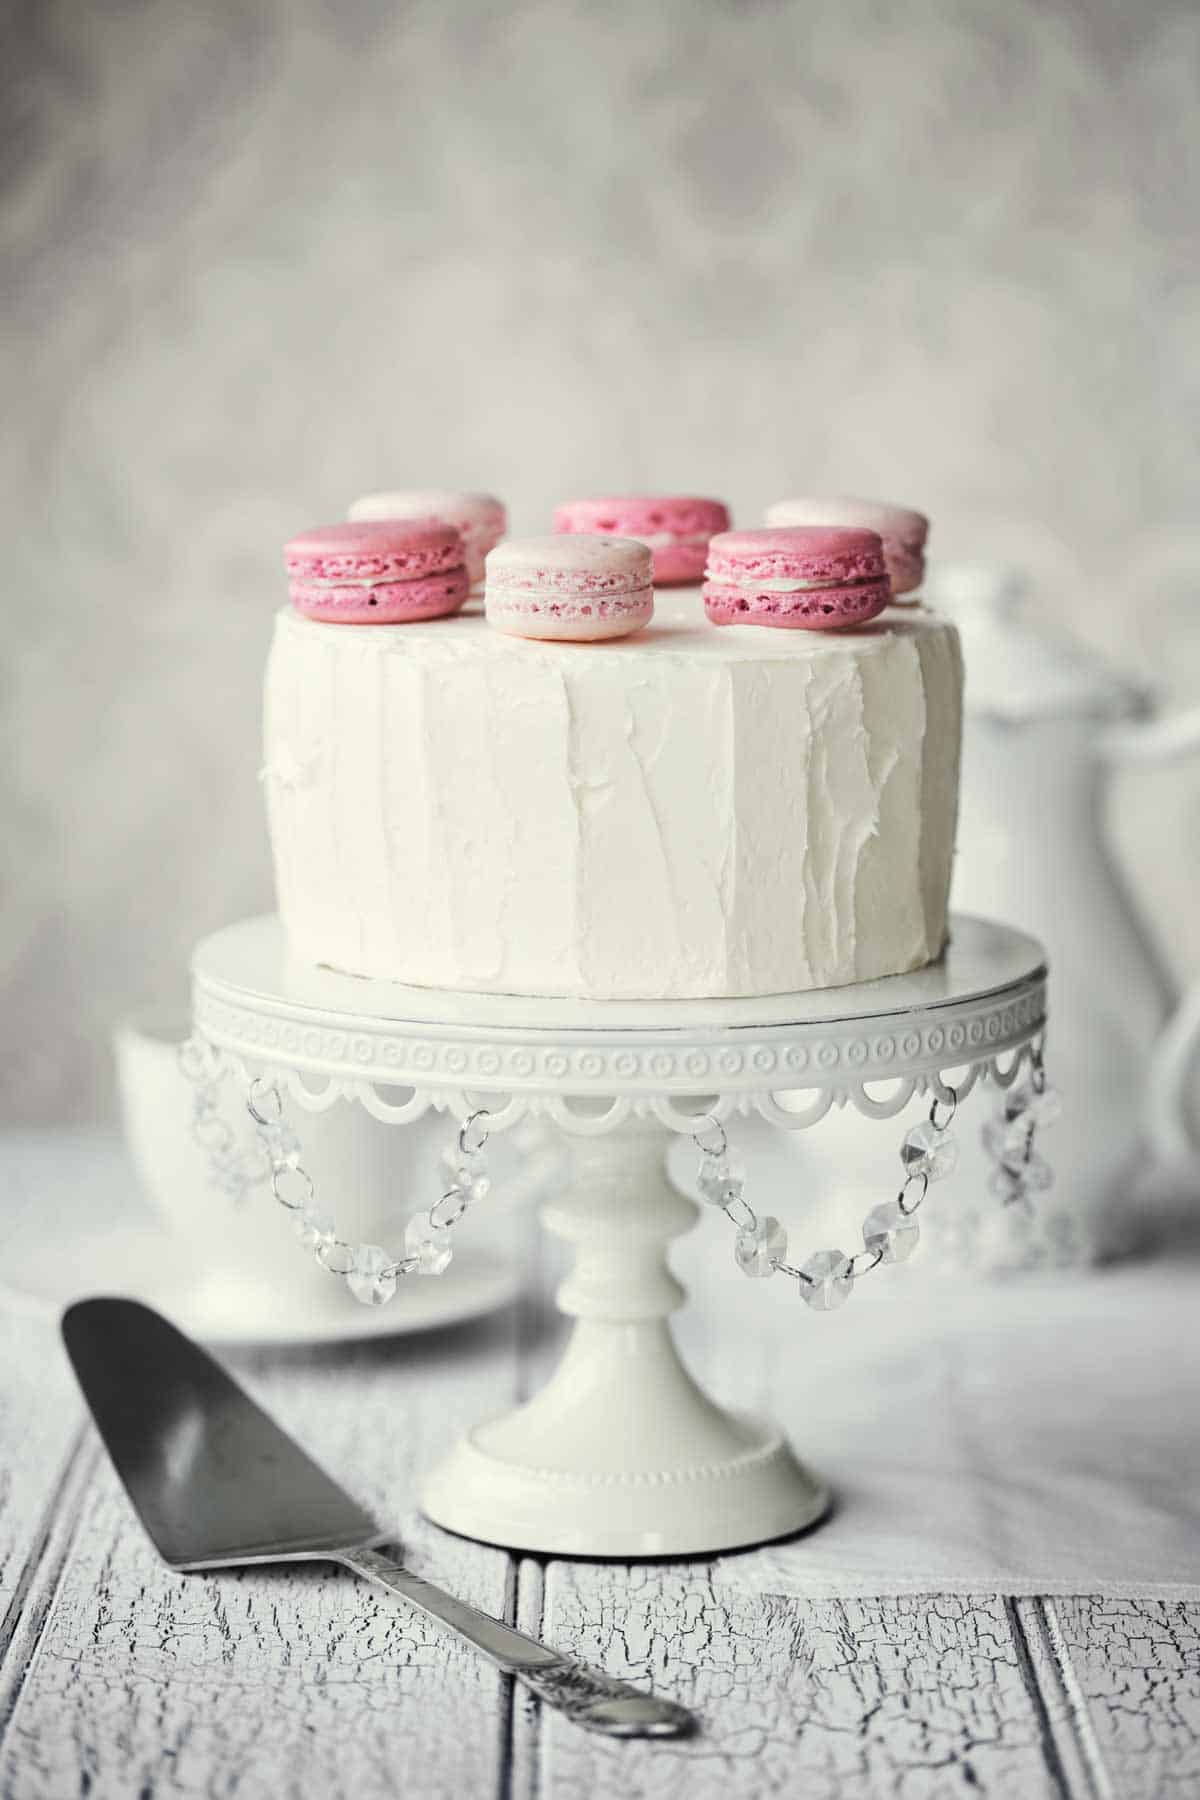 Minimalist white cake with macaroons on top.